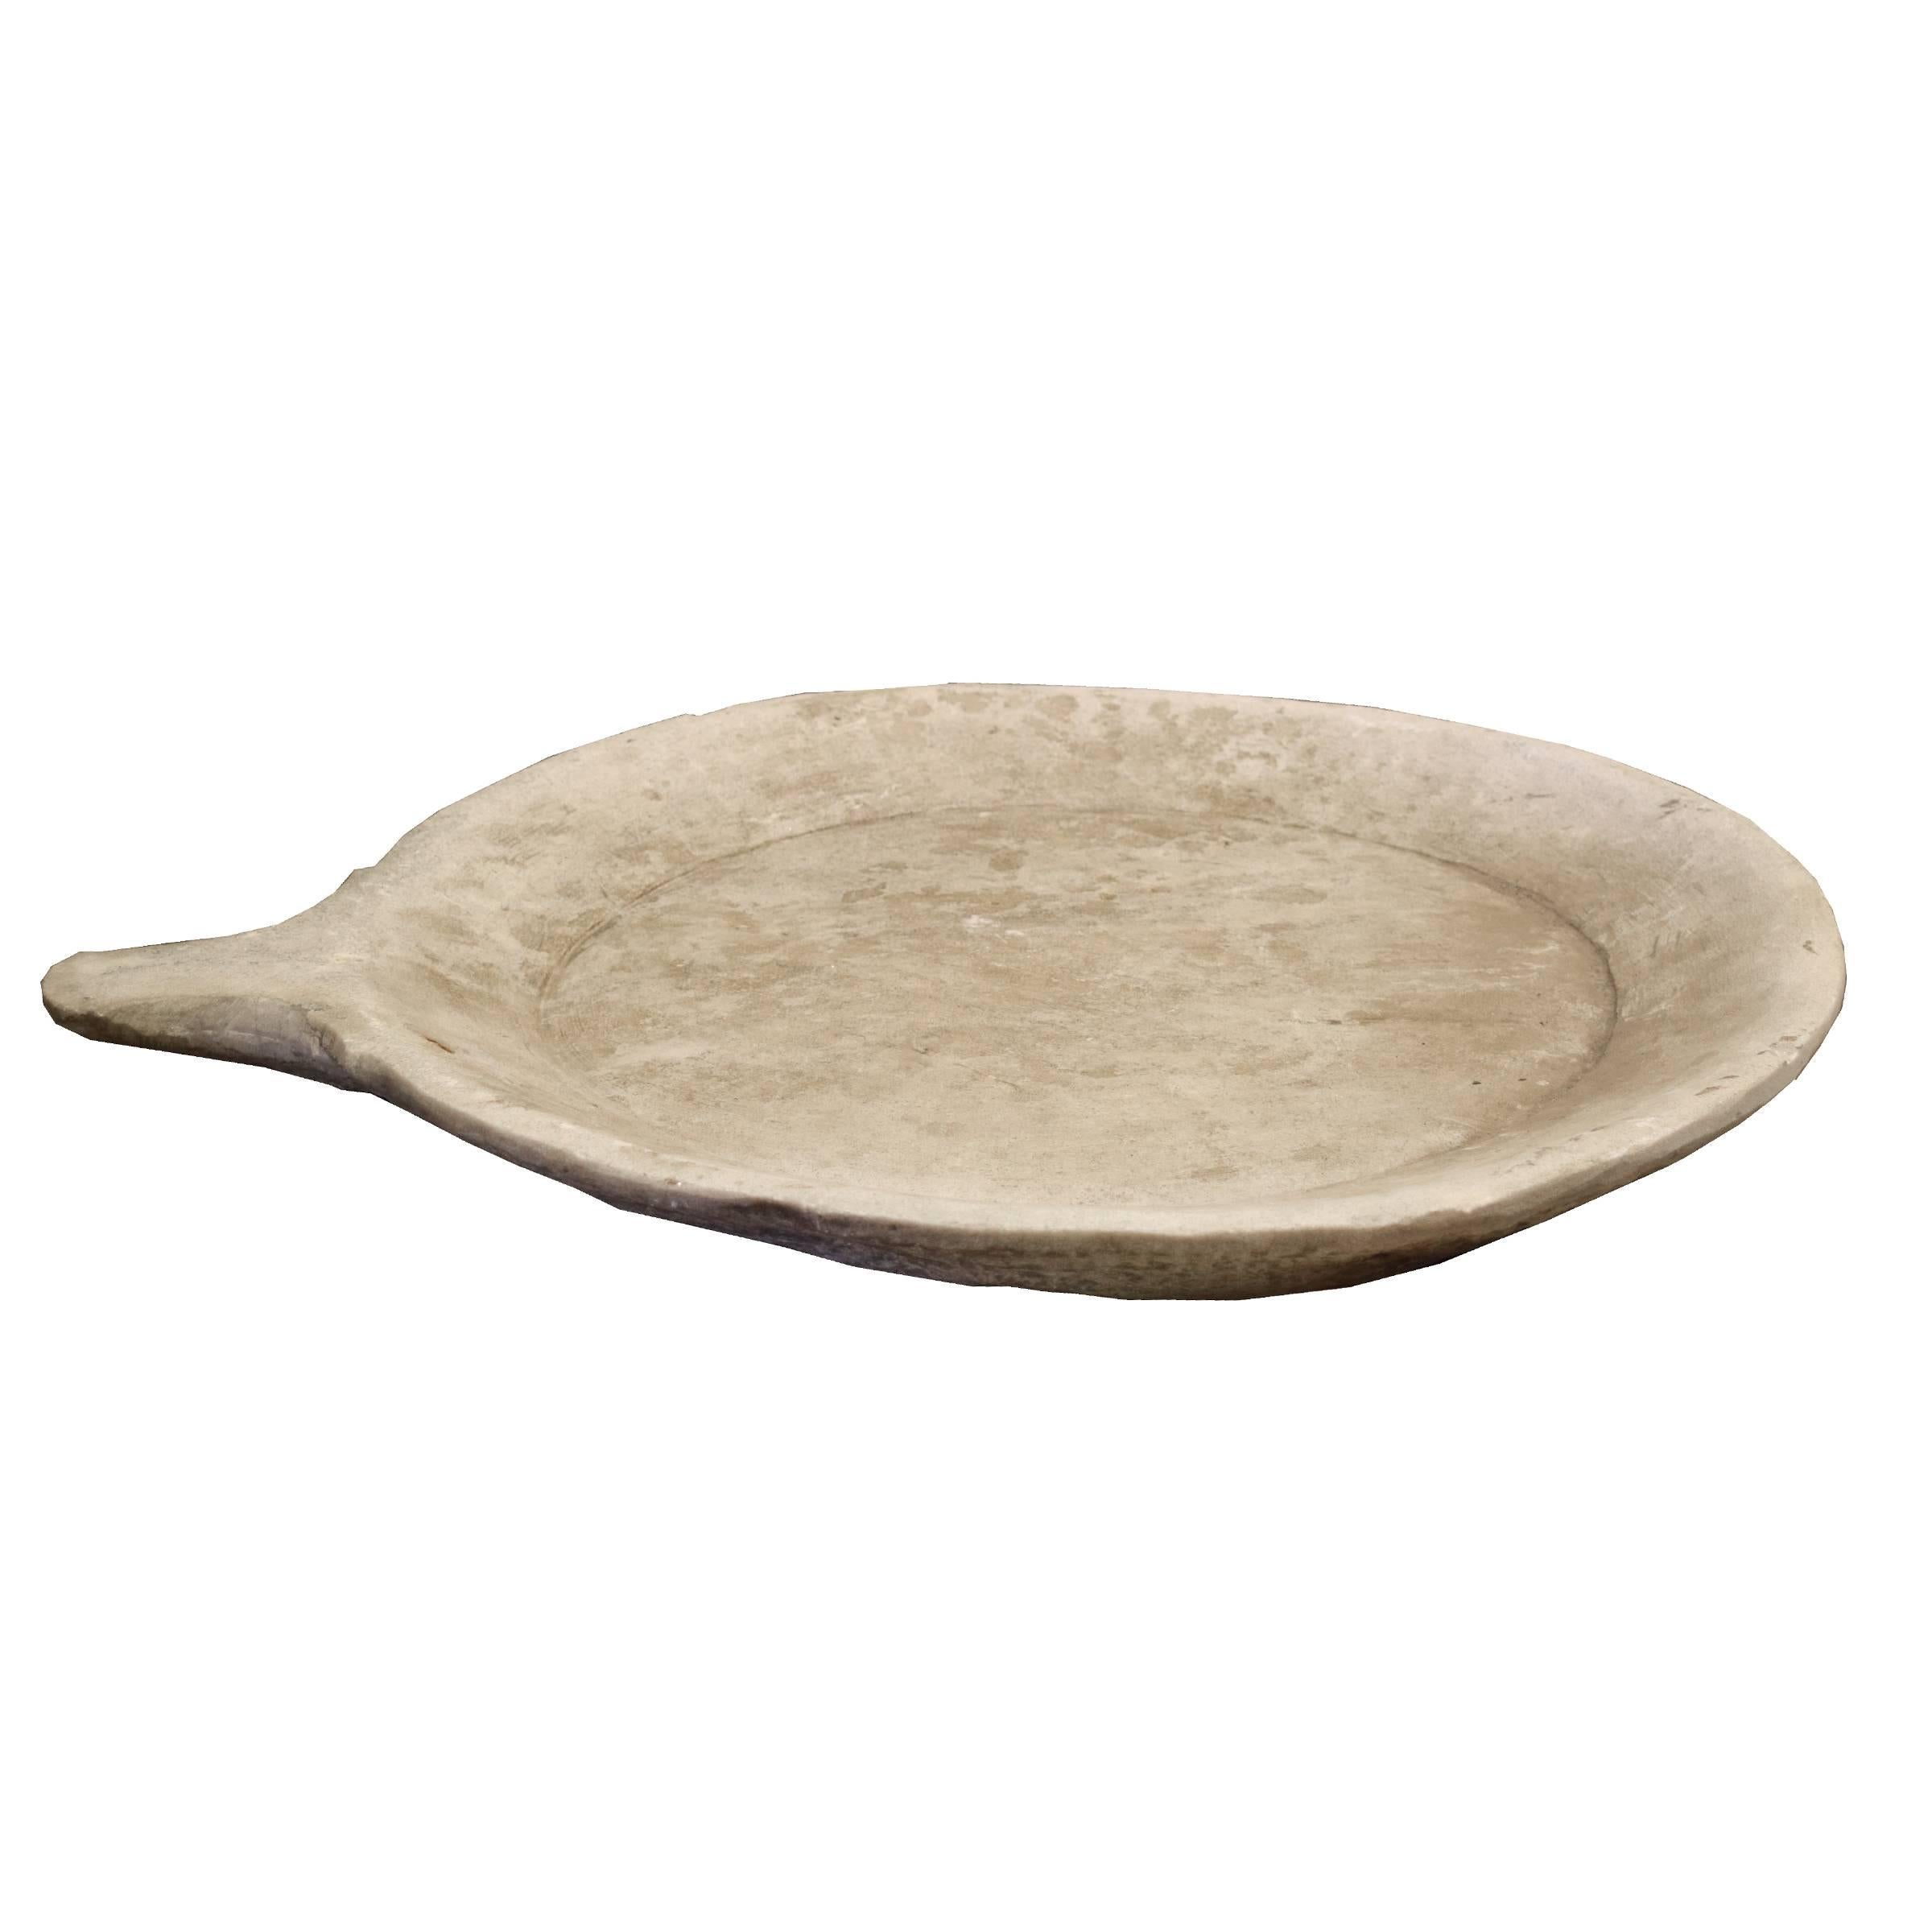 A beautiful round carved marble platter with handle, originally used for baking bread, circa 1900.
Many available. Dimensions vary, each unique.